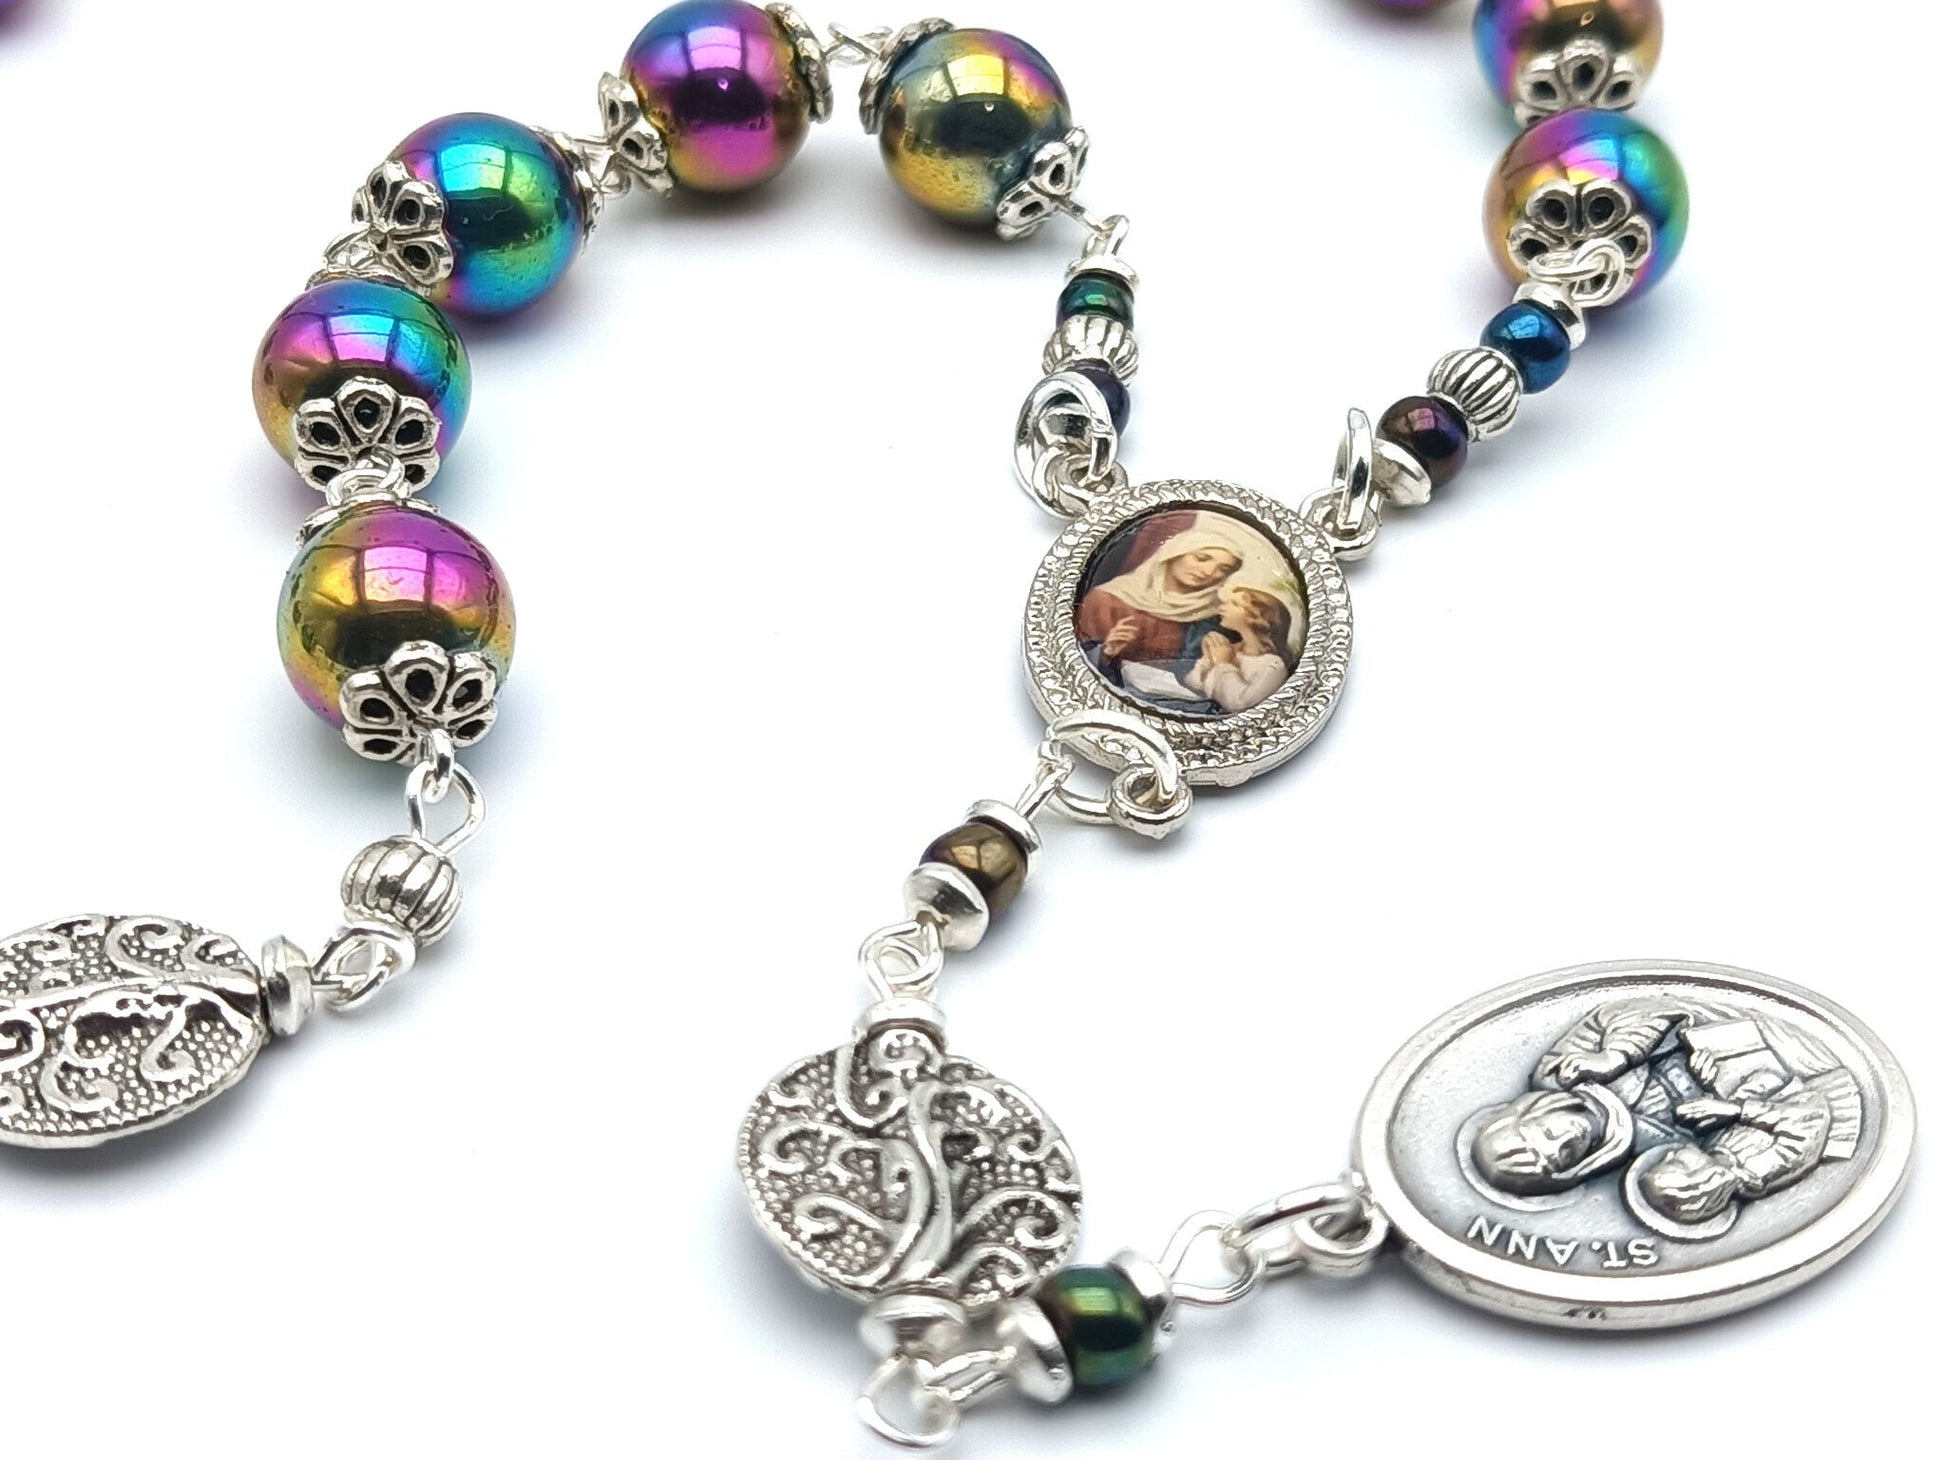 Saint Ann unique rosary beads prayer chaplet, with petrol coloured beads, silver picture centre medal, bead caps and Saint Ann medal.